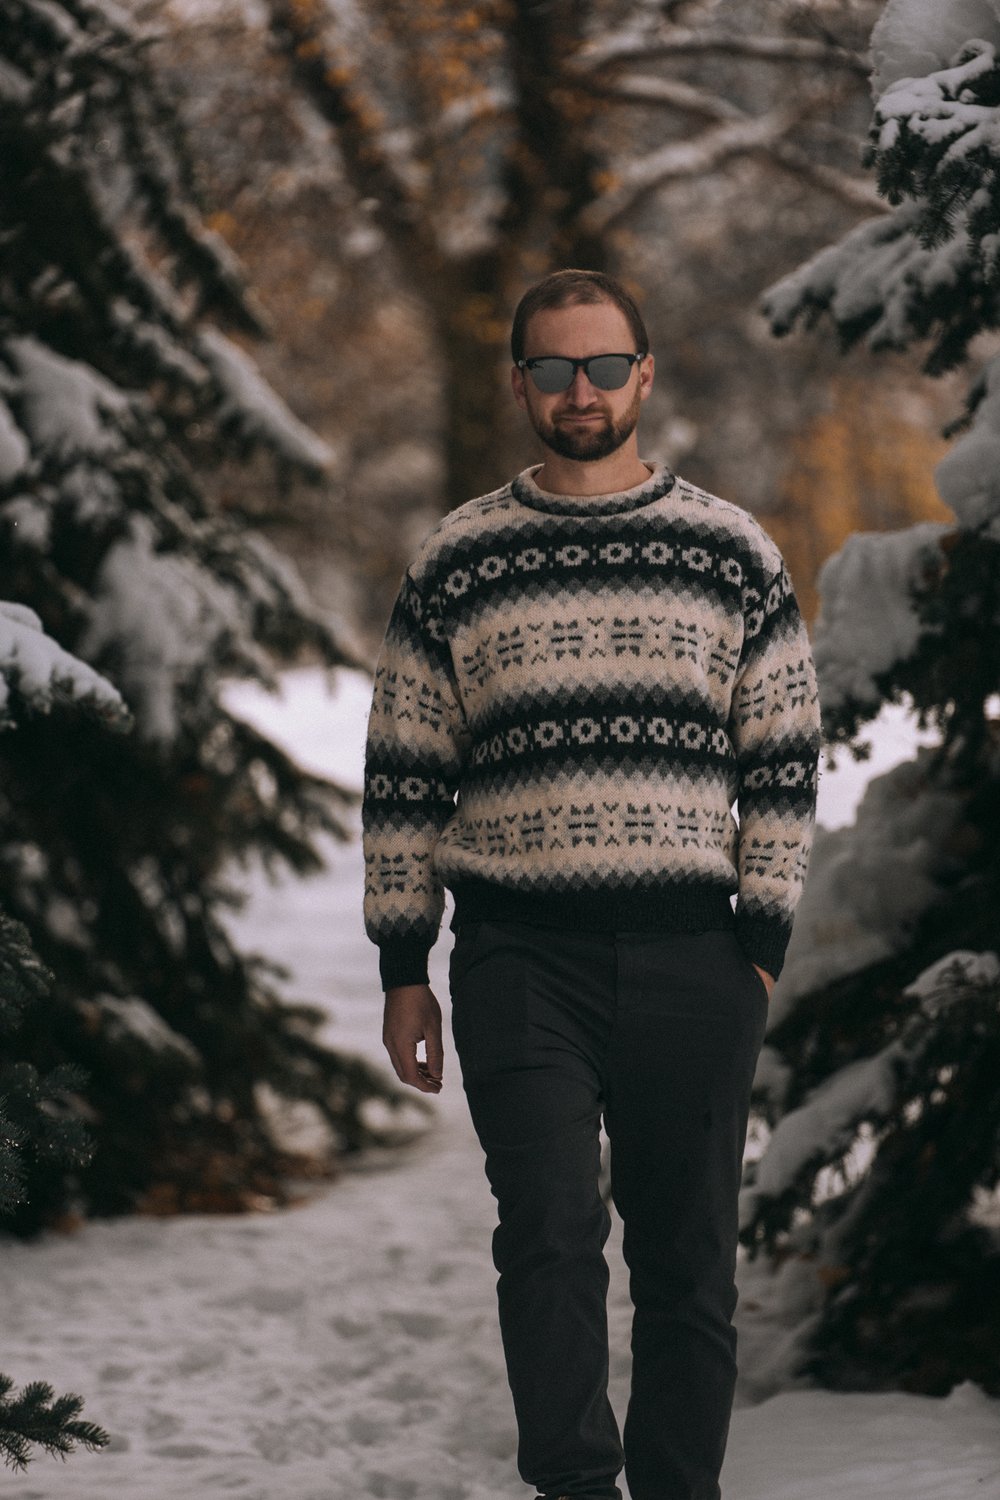 a classic nordic sweater for venturing outdoors